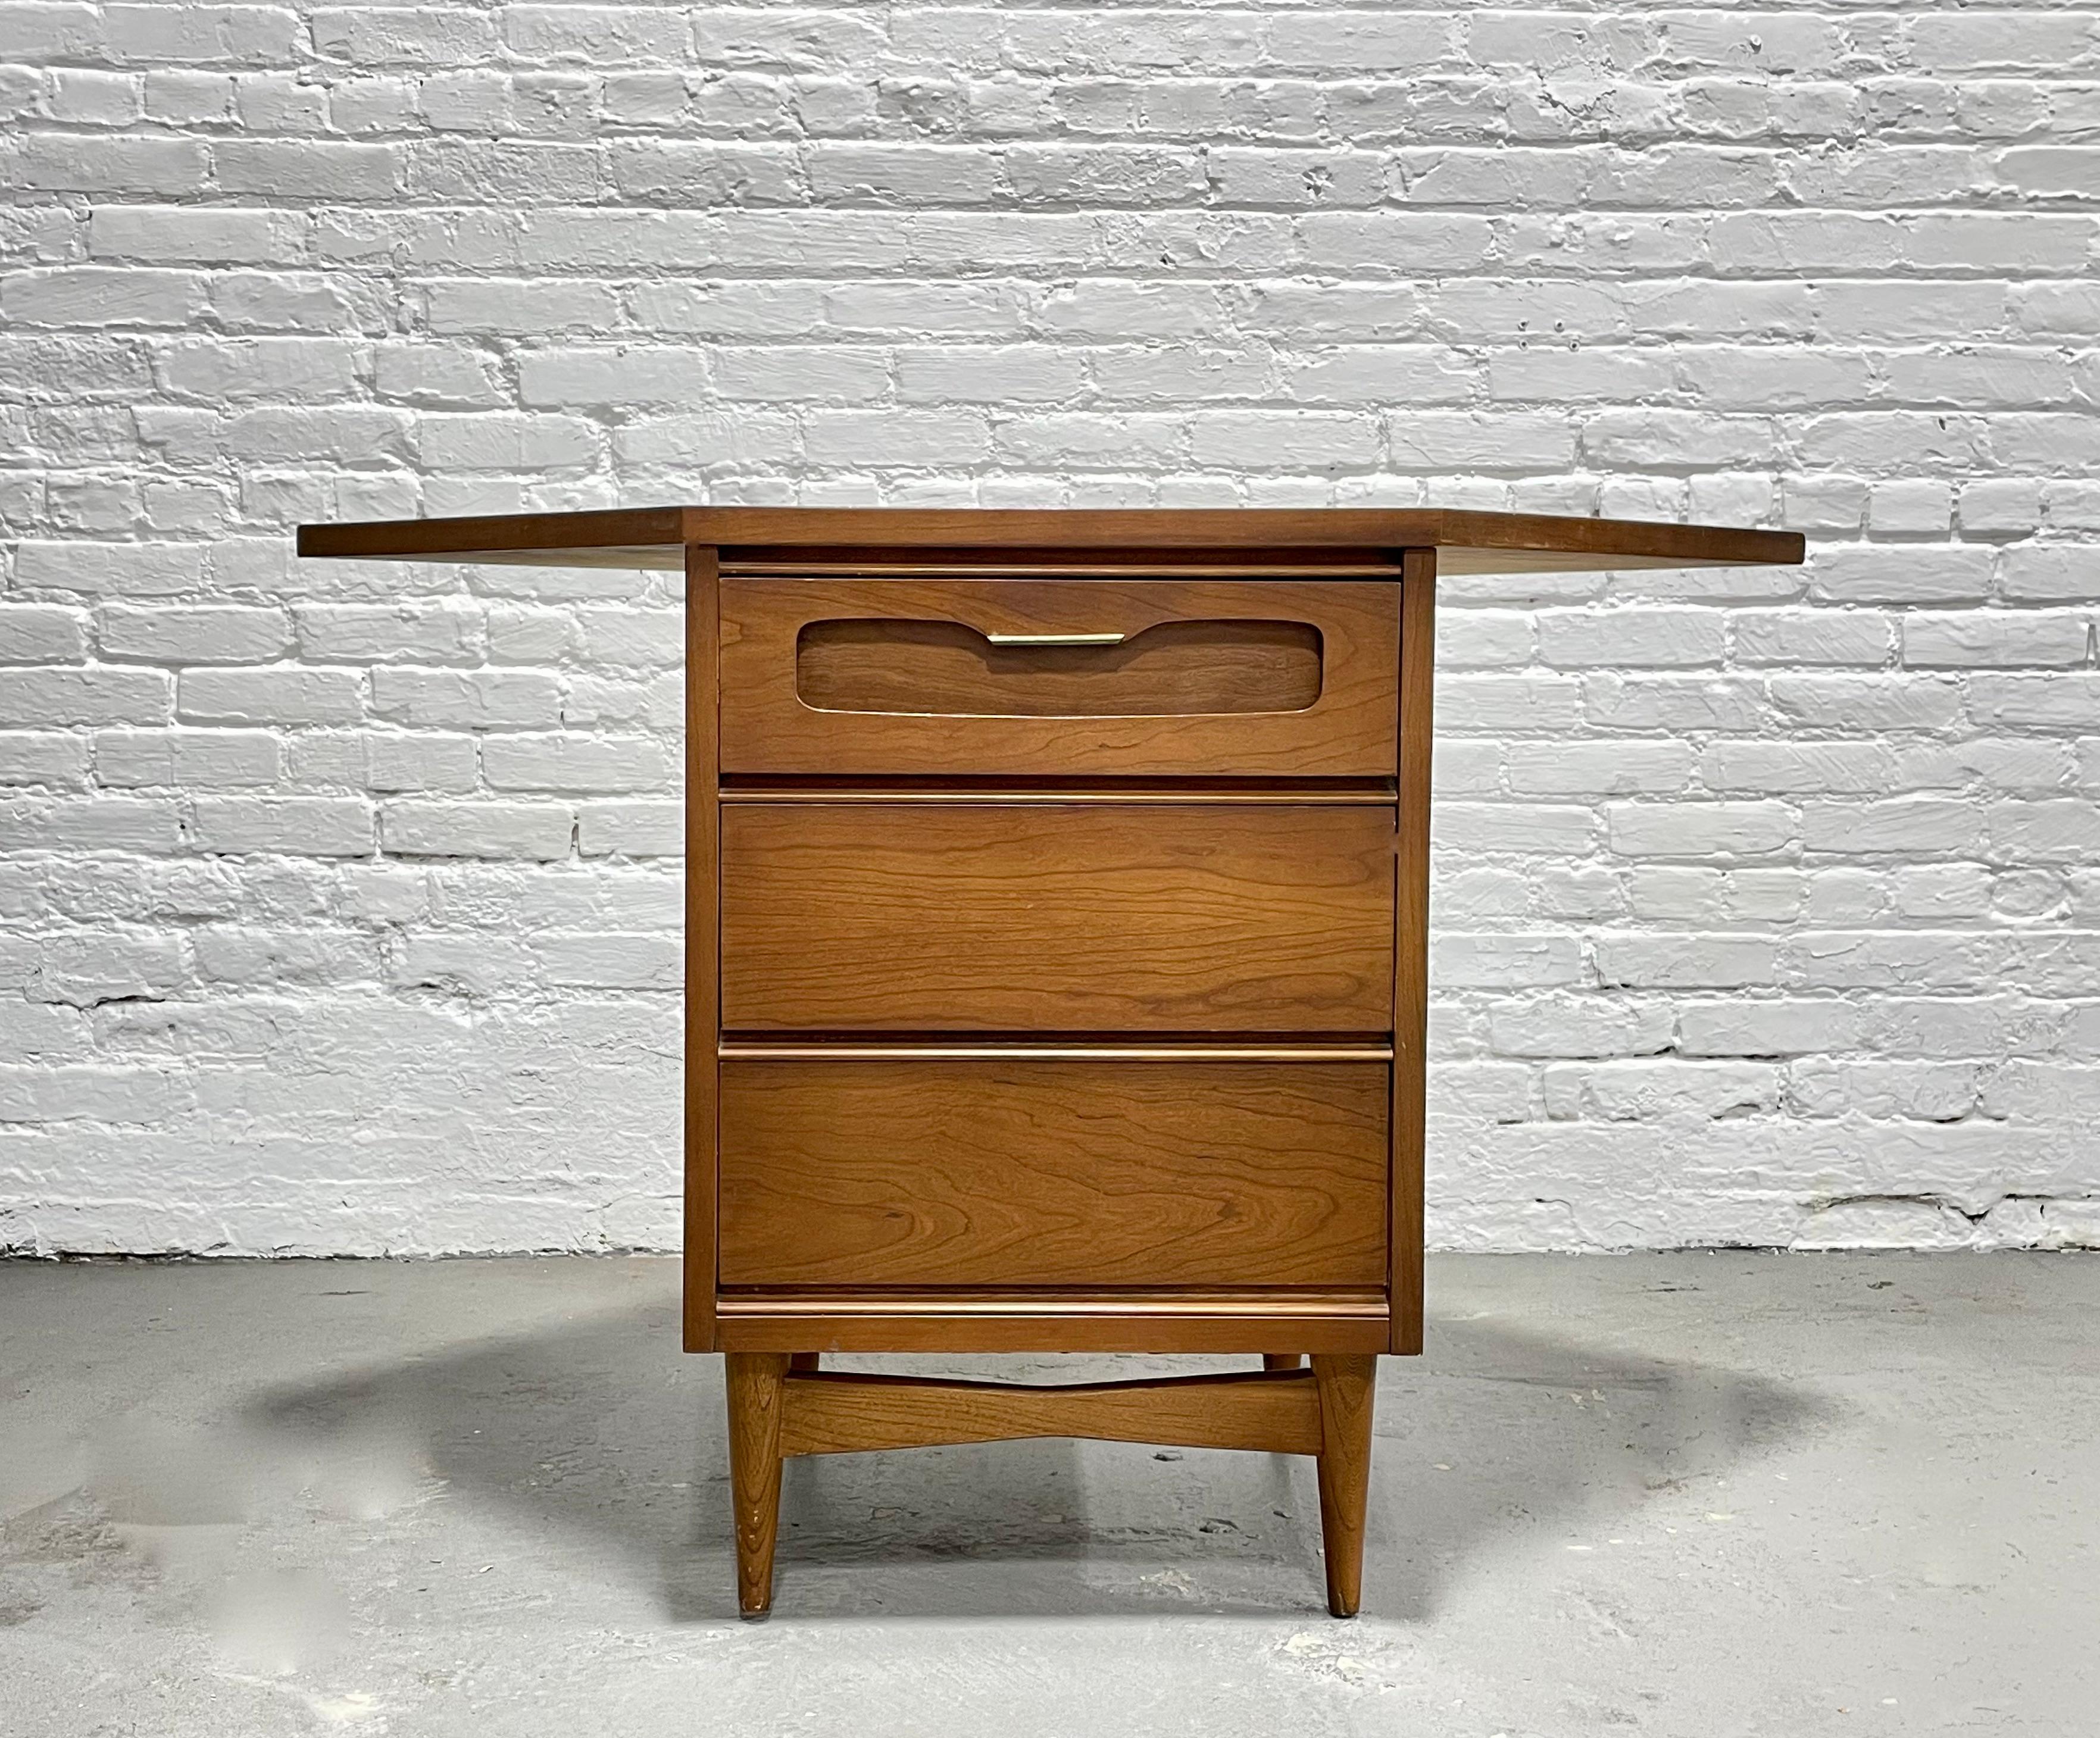 Mid-Century Modern Corner Dresser / Cabinet by Bassett Furniture Co., circa 1960s. This thoughtful piece takes up minimal floor space as it fits neatly into a corner yet provides three deep and spacious drawers for storage. Place in your entryway as